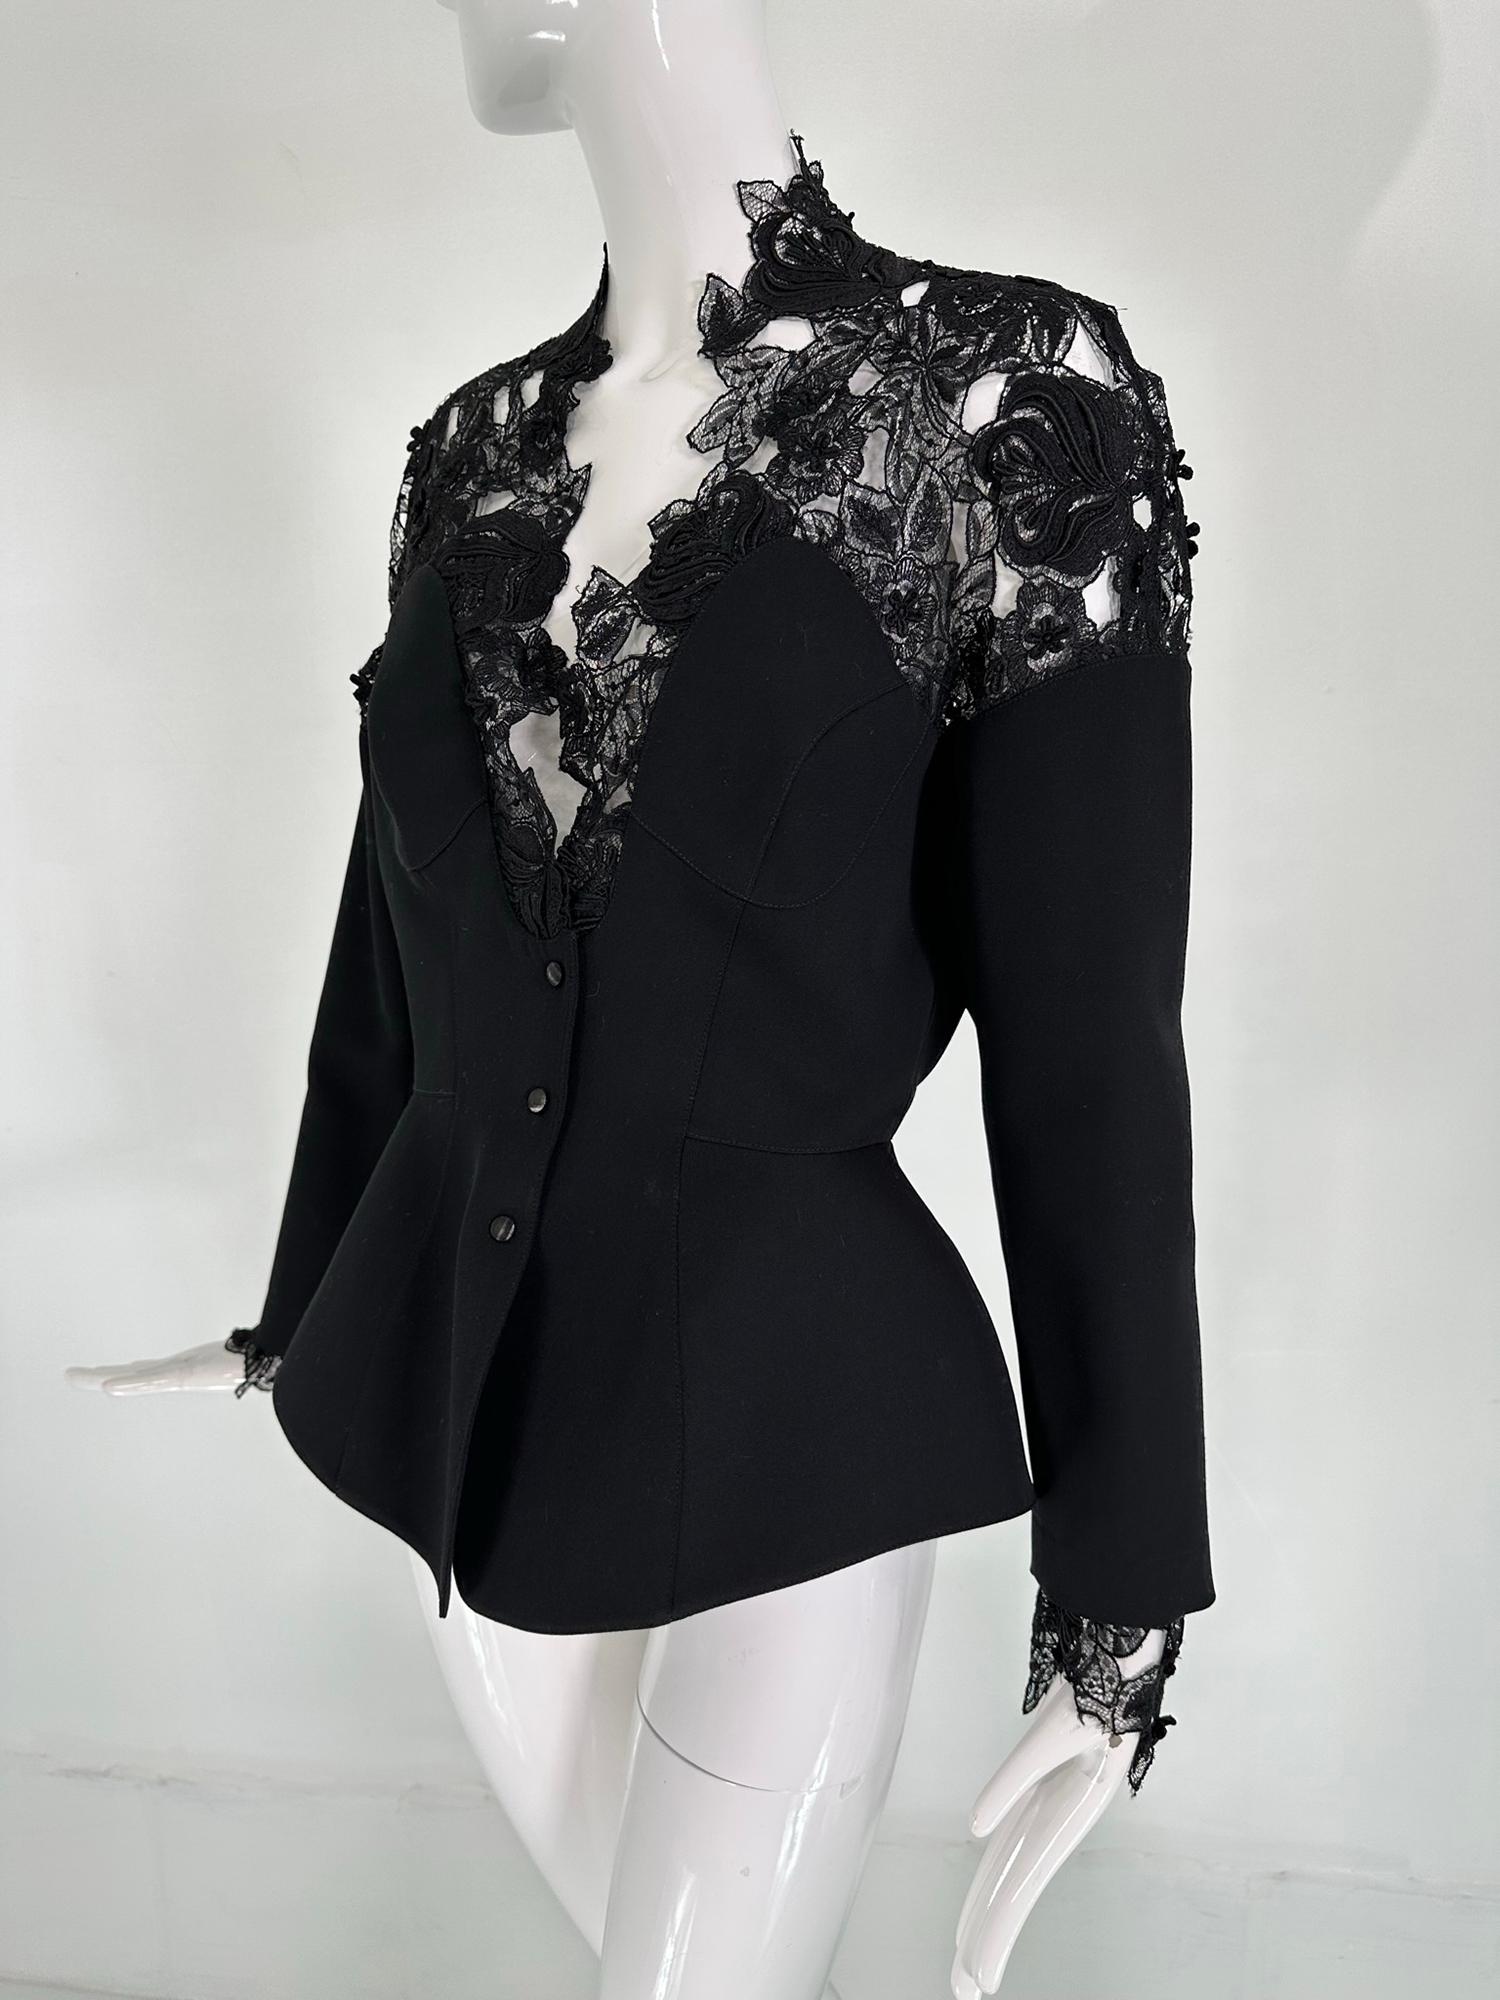 Thierry Mugler black roses lace yoke front & back jacket, dolman sleeves & peplum hem. This sexy jacket has a plunge V neckline with open work lace roses, the front & back shoulder yokes are done in open work lace, the lace at the neck back curves